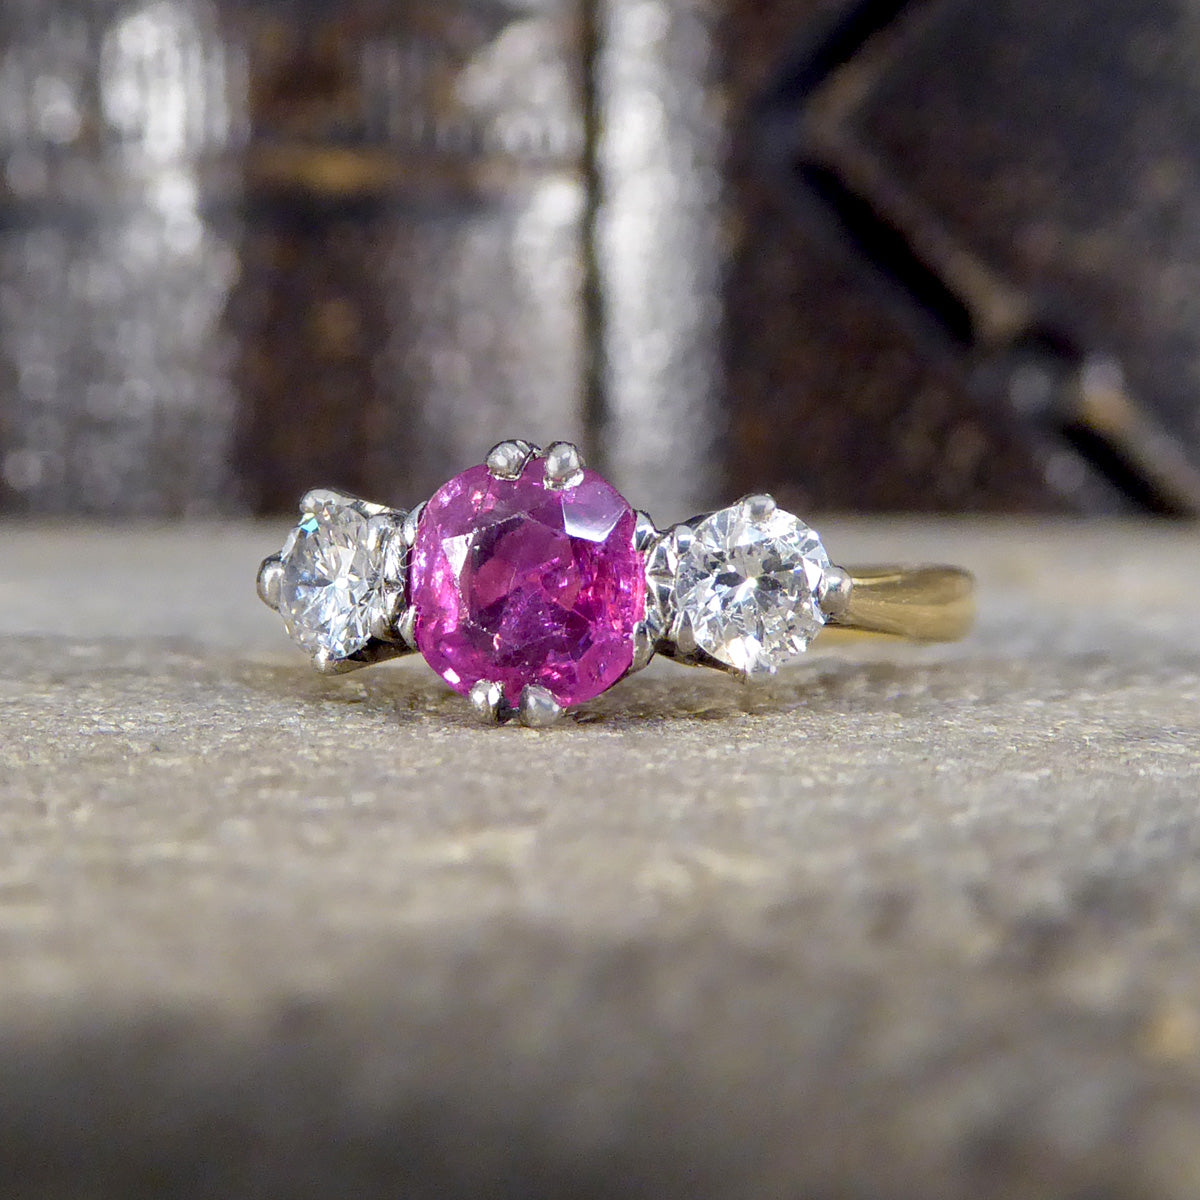 Early 20th Century Ruby and Diamond Three Stone Ring in 18ct Yellow Gold and Platinum